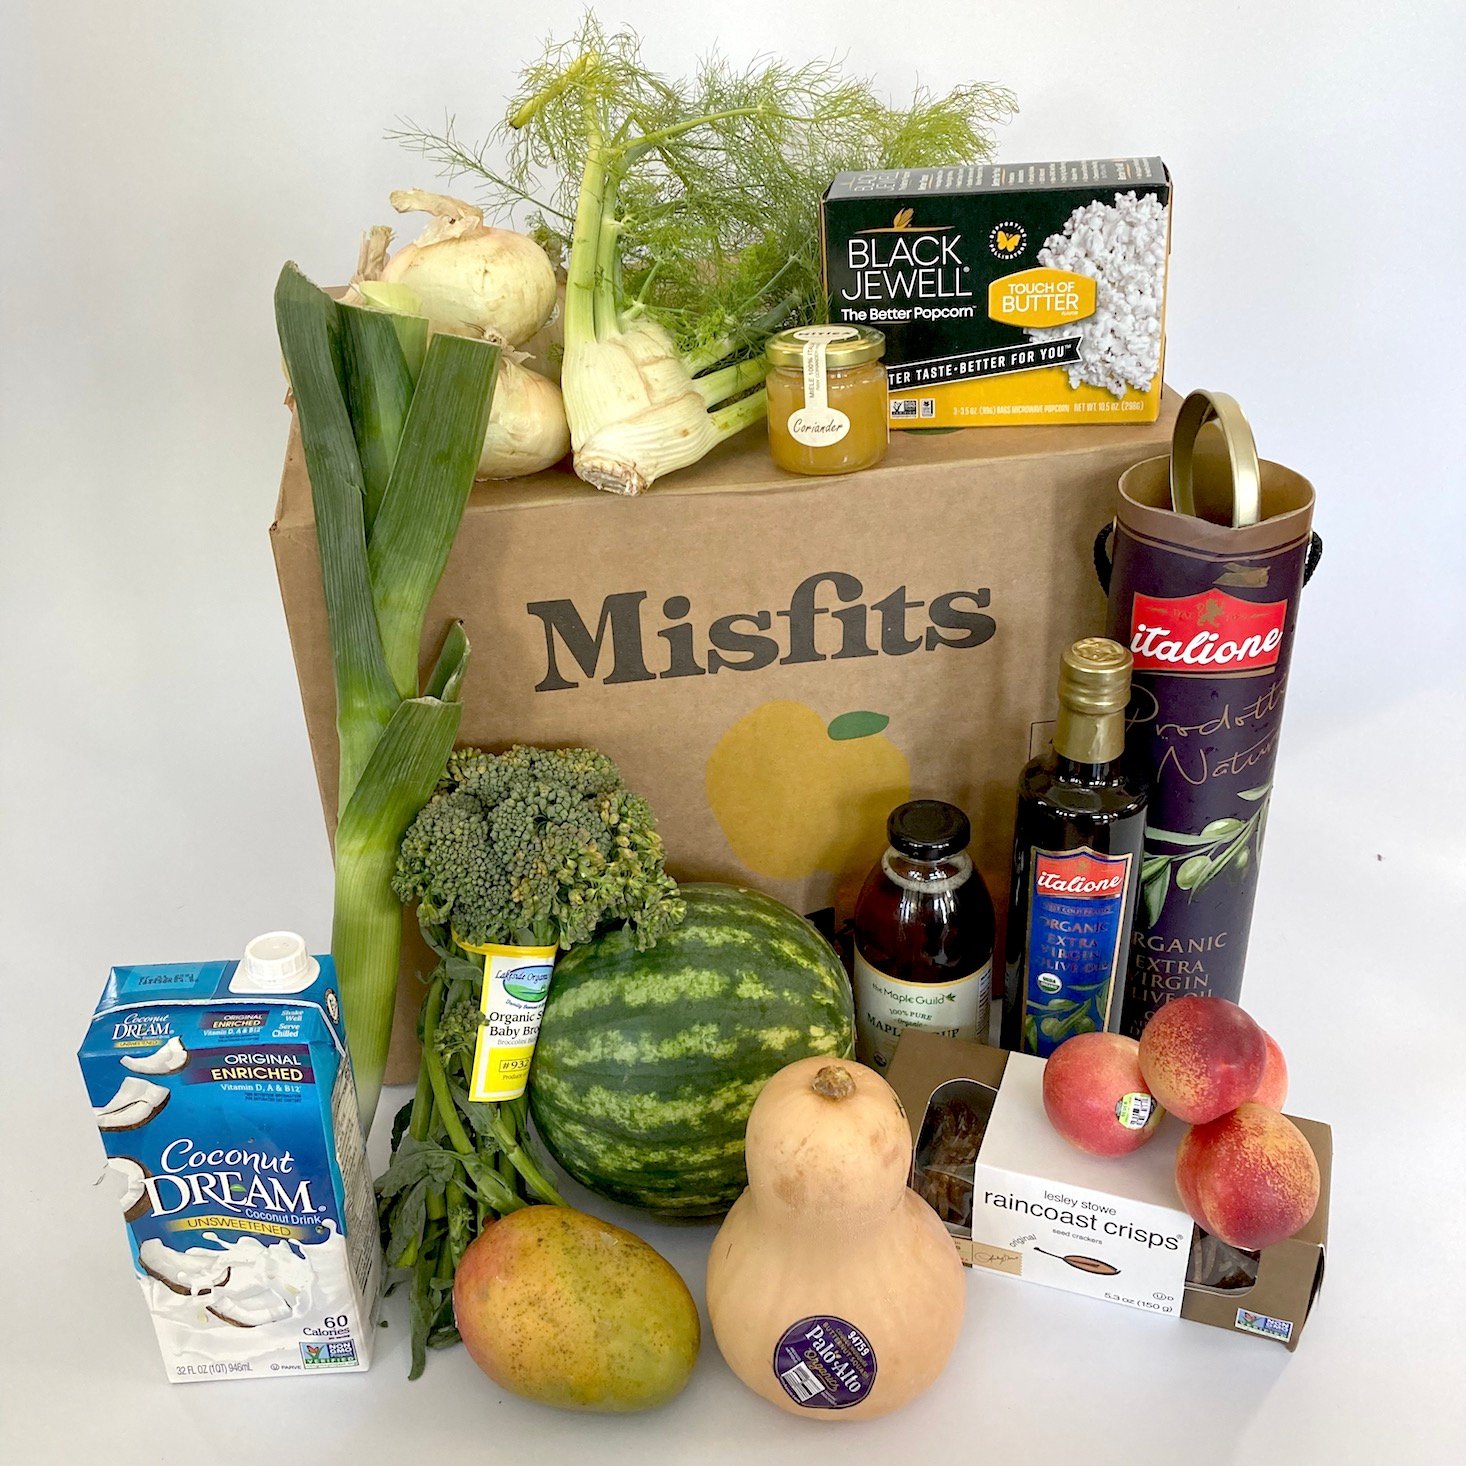 Misfits Market Review Everything You Need to Know About This